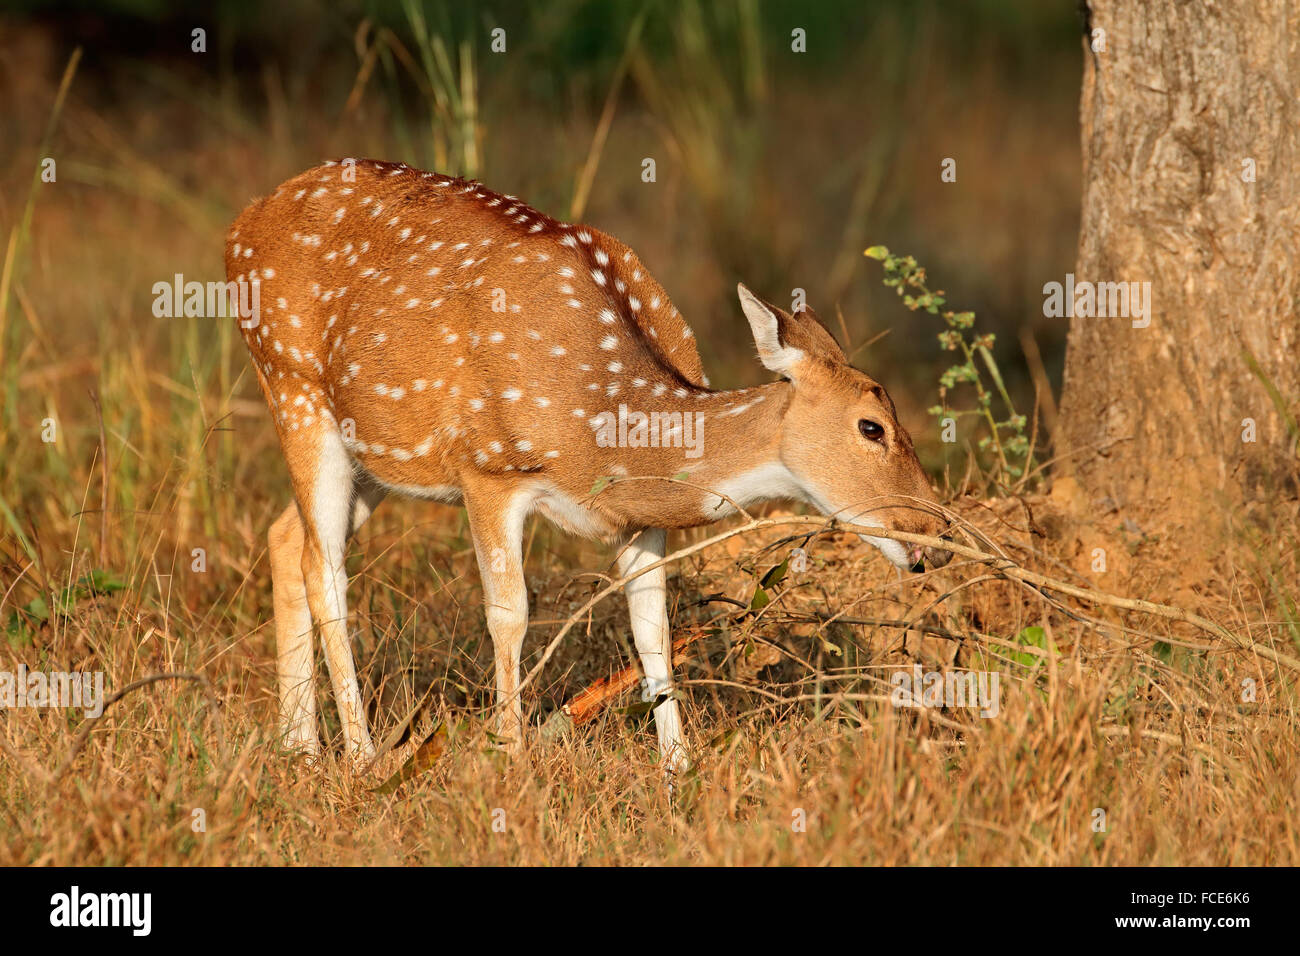 Female spotted deer or chital (Axis axis), Kanha National Park, India Stock Photo